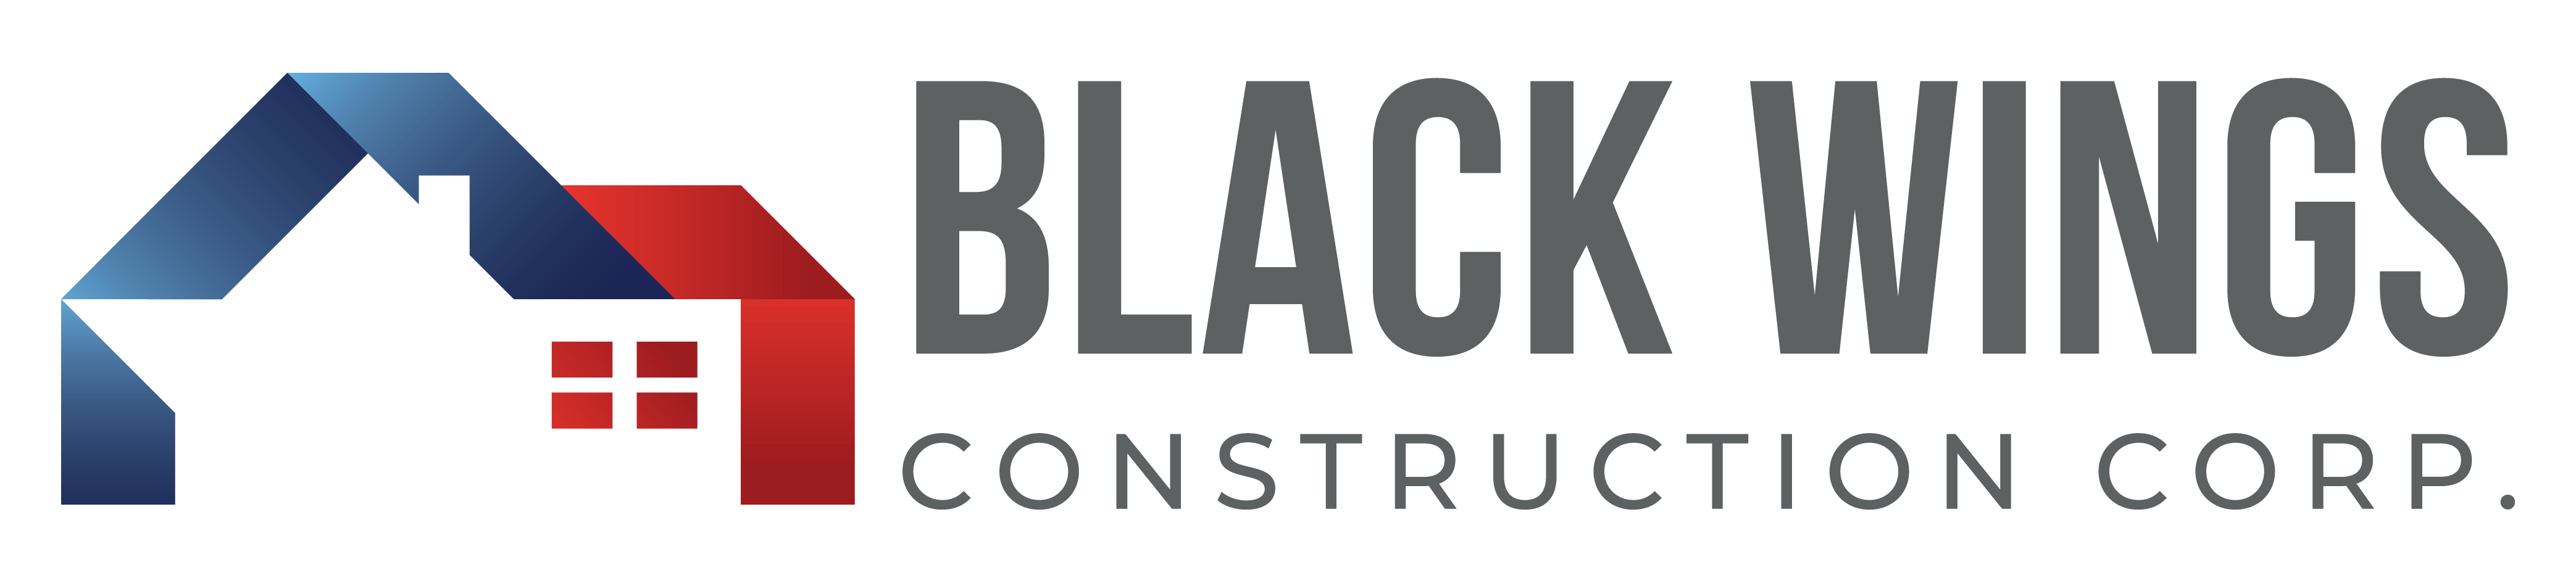 Black Wings Construction Corp